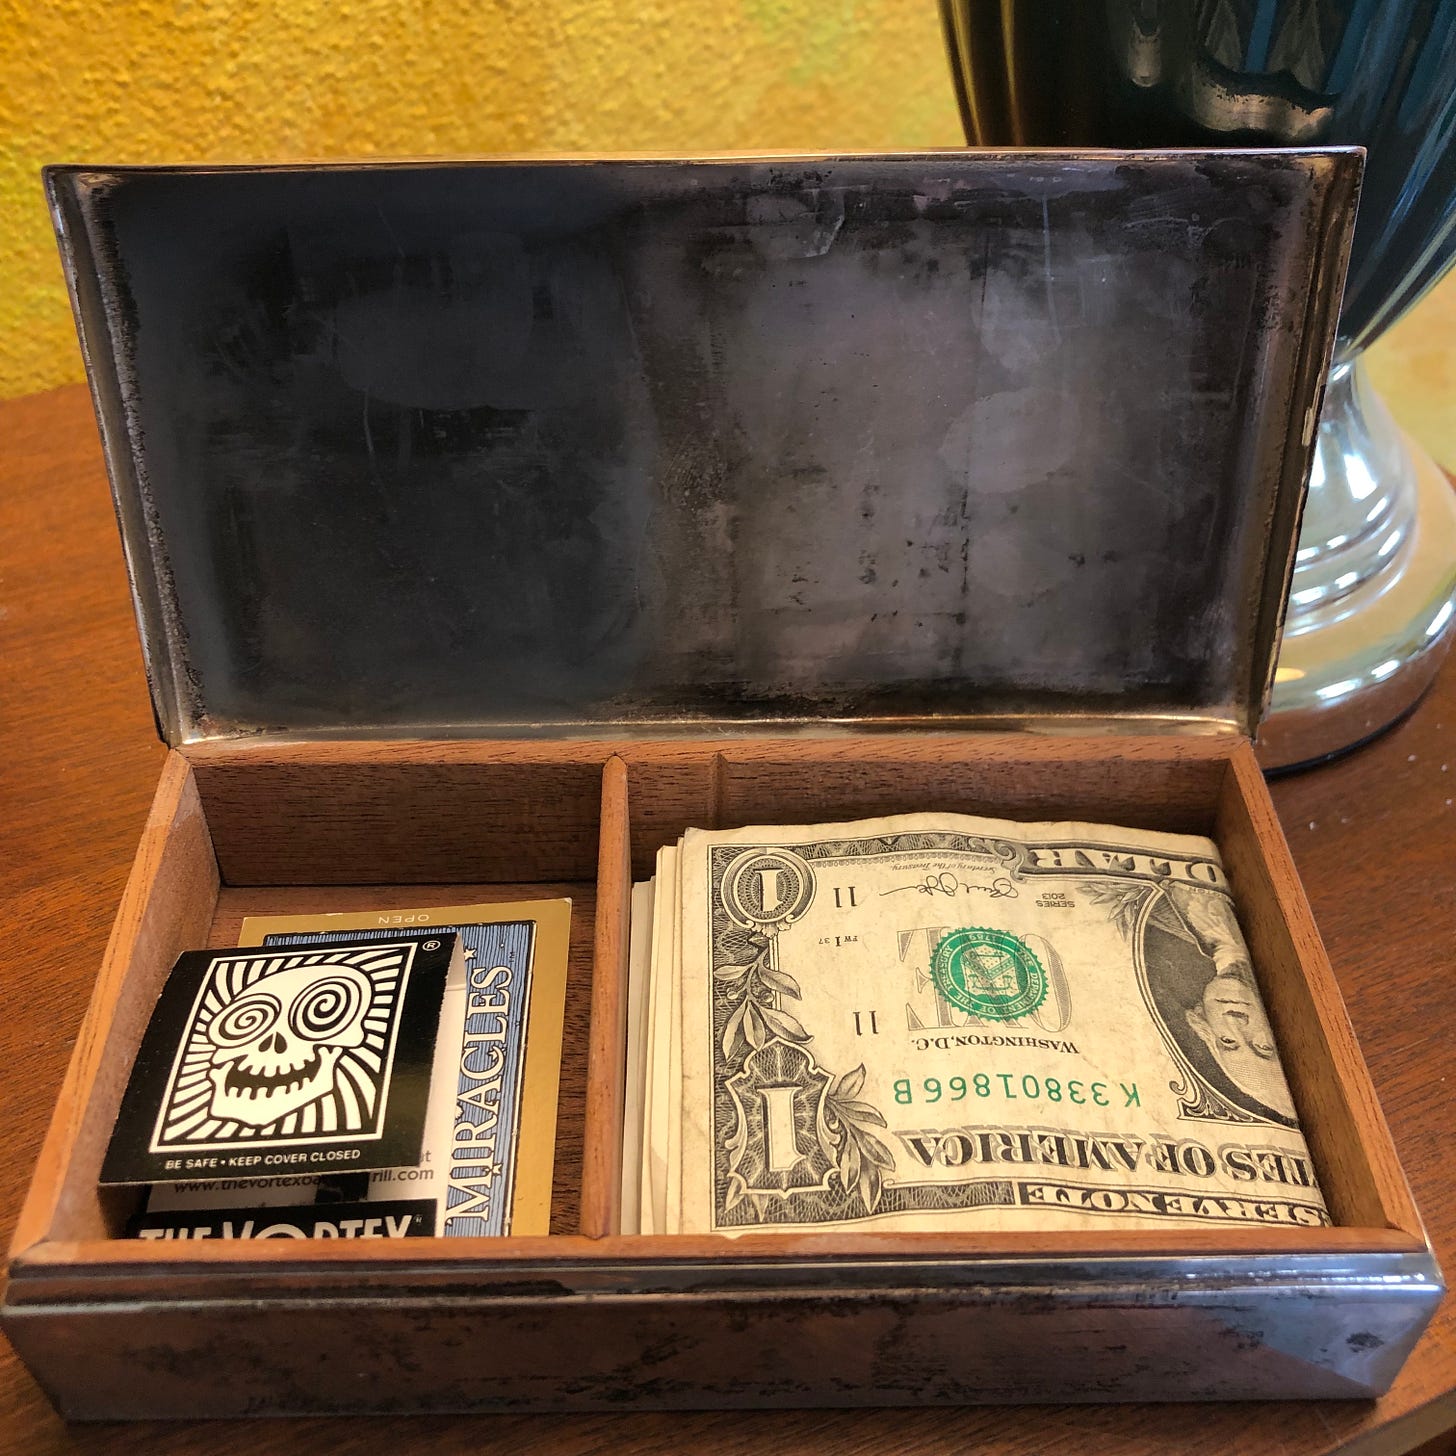 Open box showing dollar bills and matches